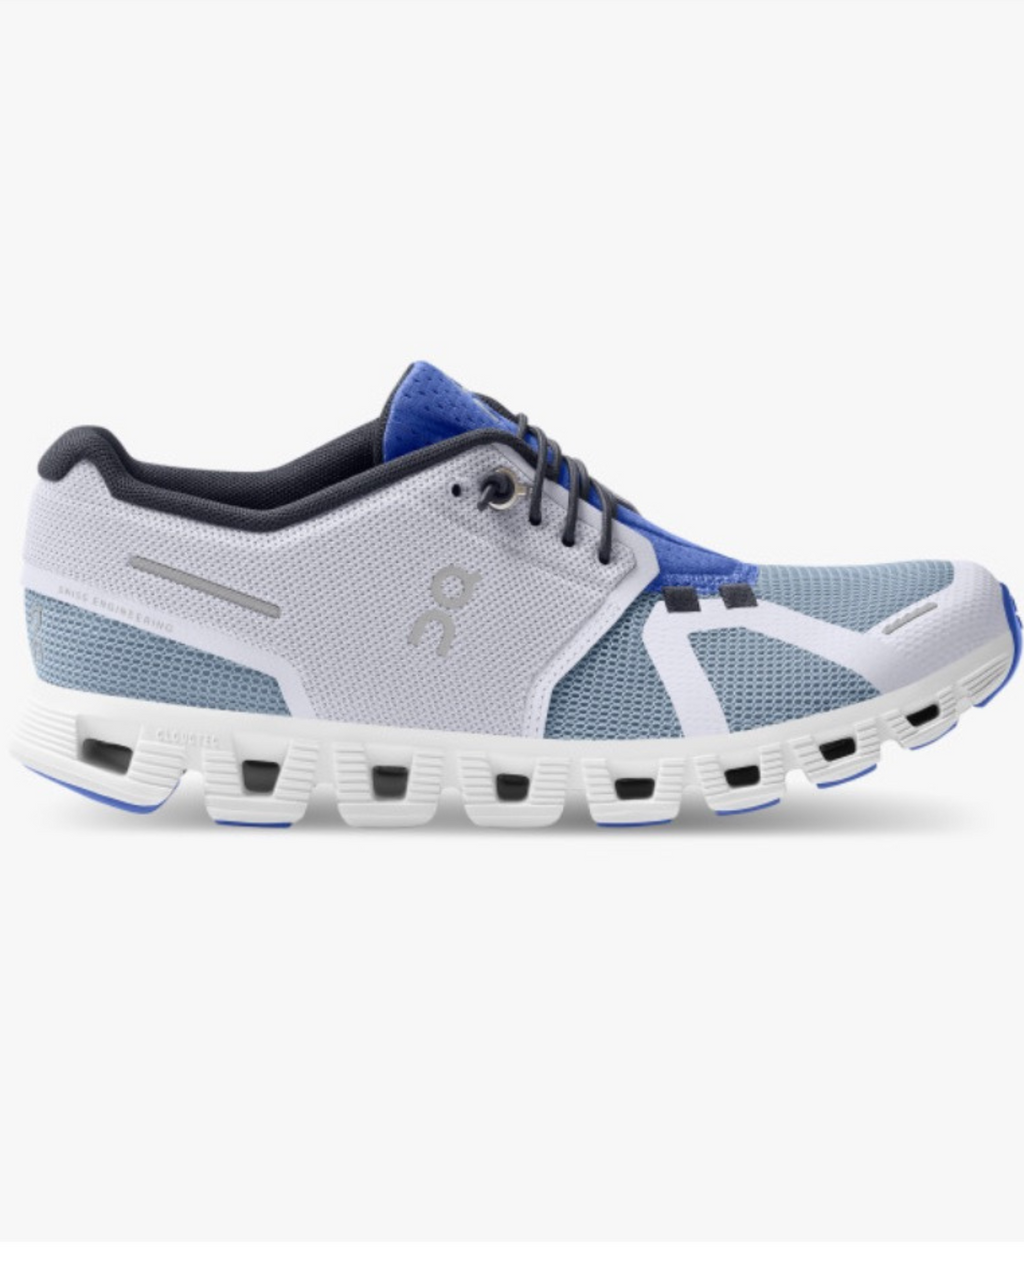 Cloud 5 Push Sneaker Lavender/Chambray - Island Outfitters